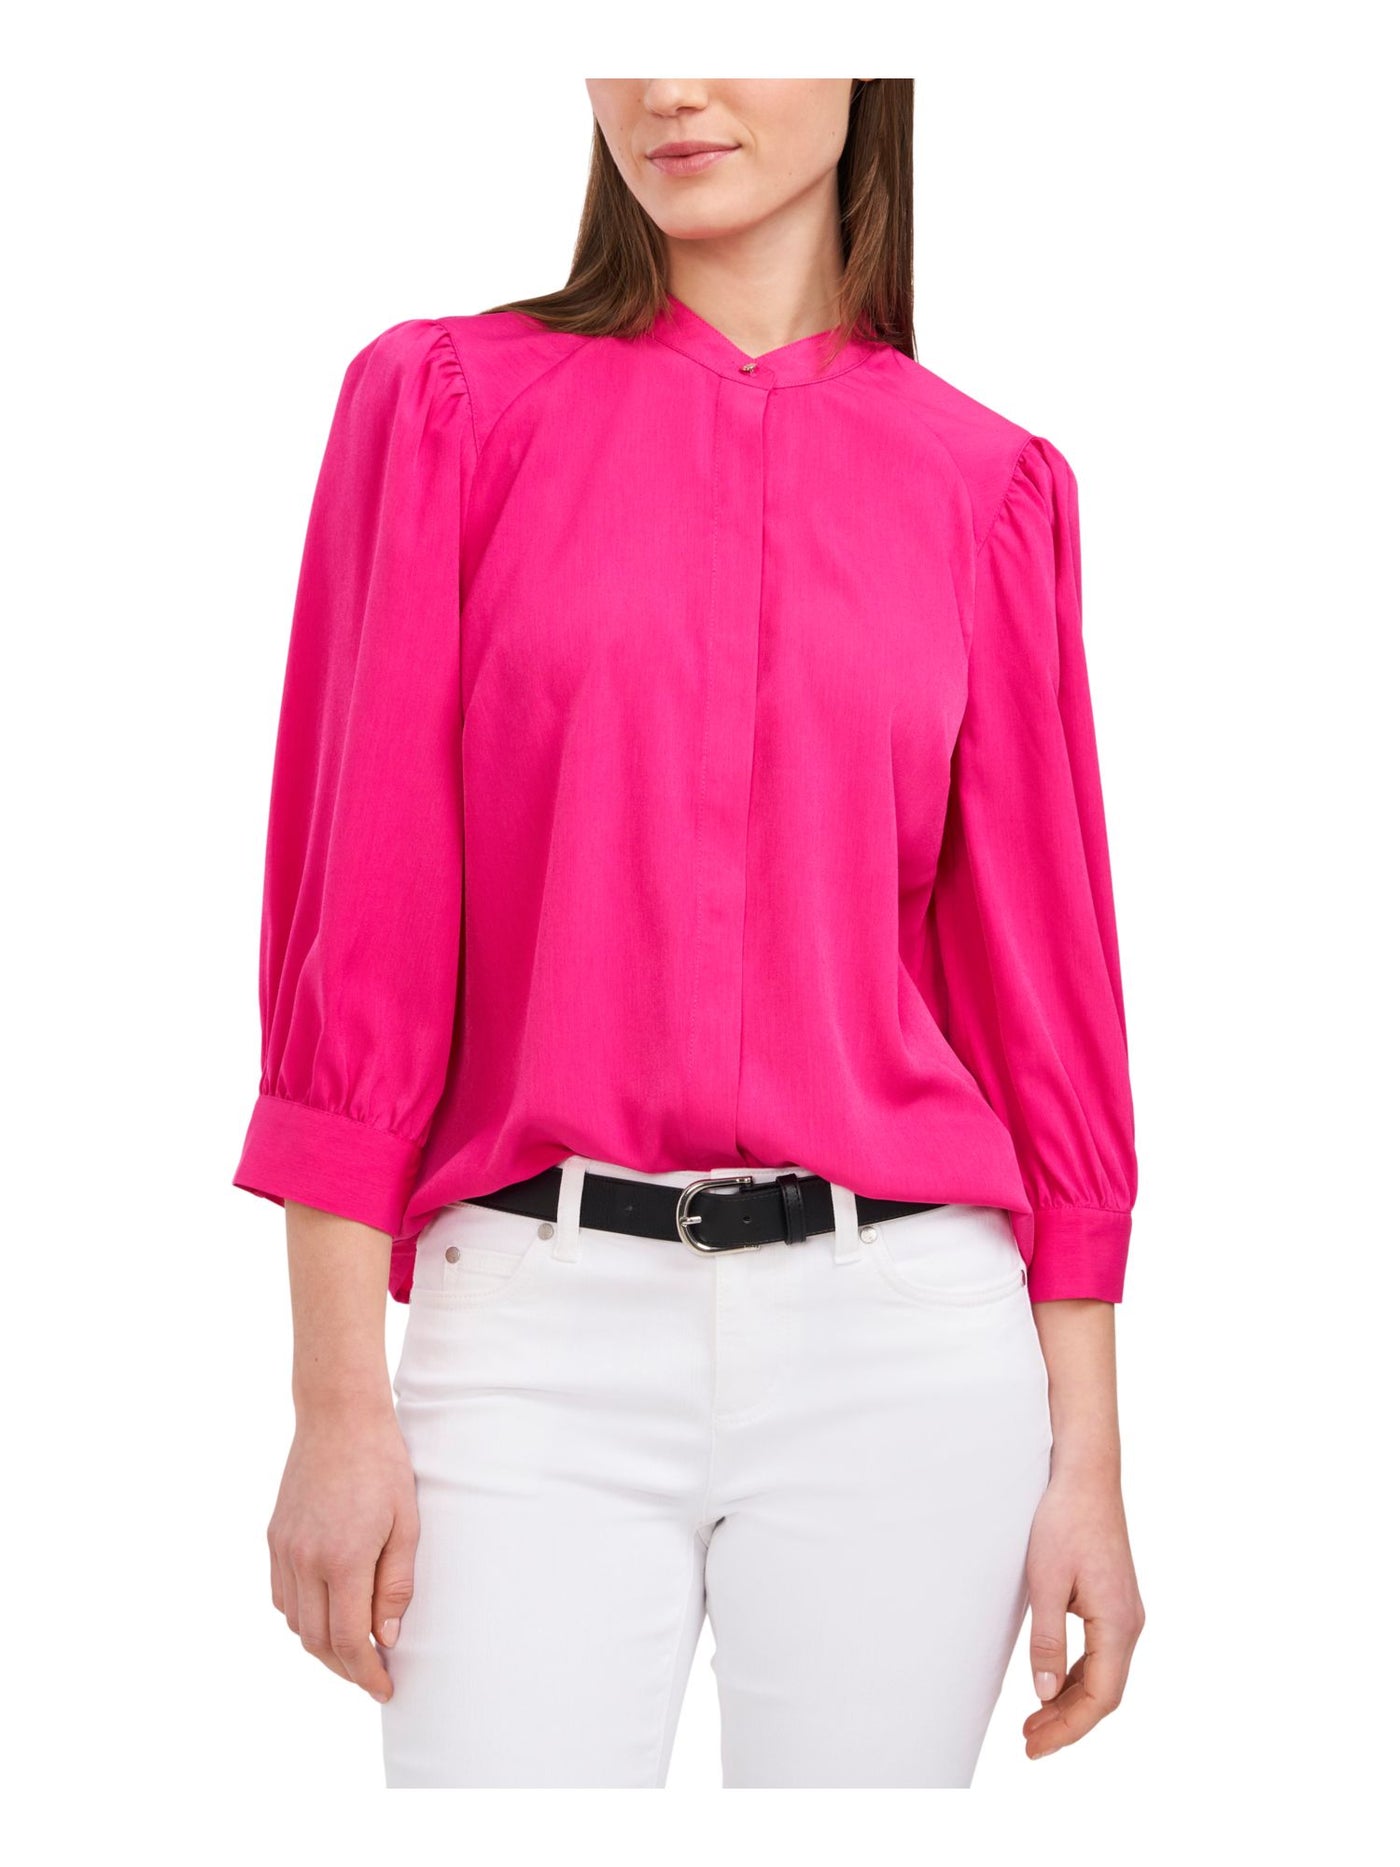 RILEY&RAE Womens Pleated Puff-shoulder High-neck Cuffed Sleeve Blouse